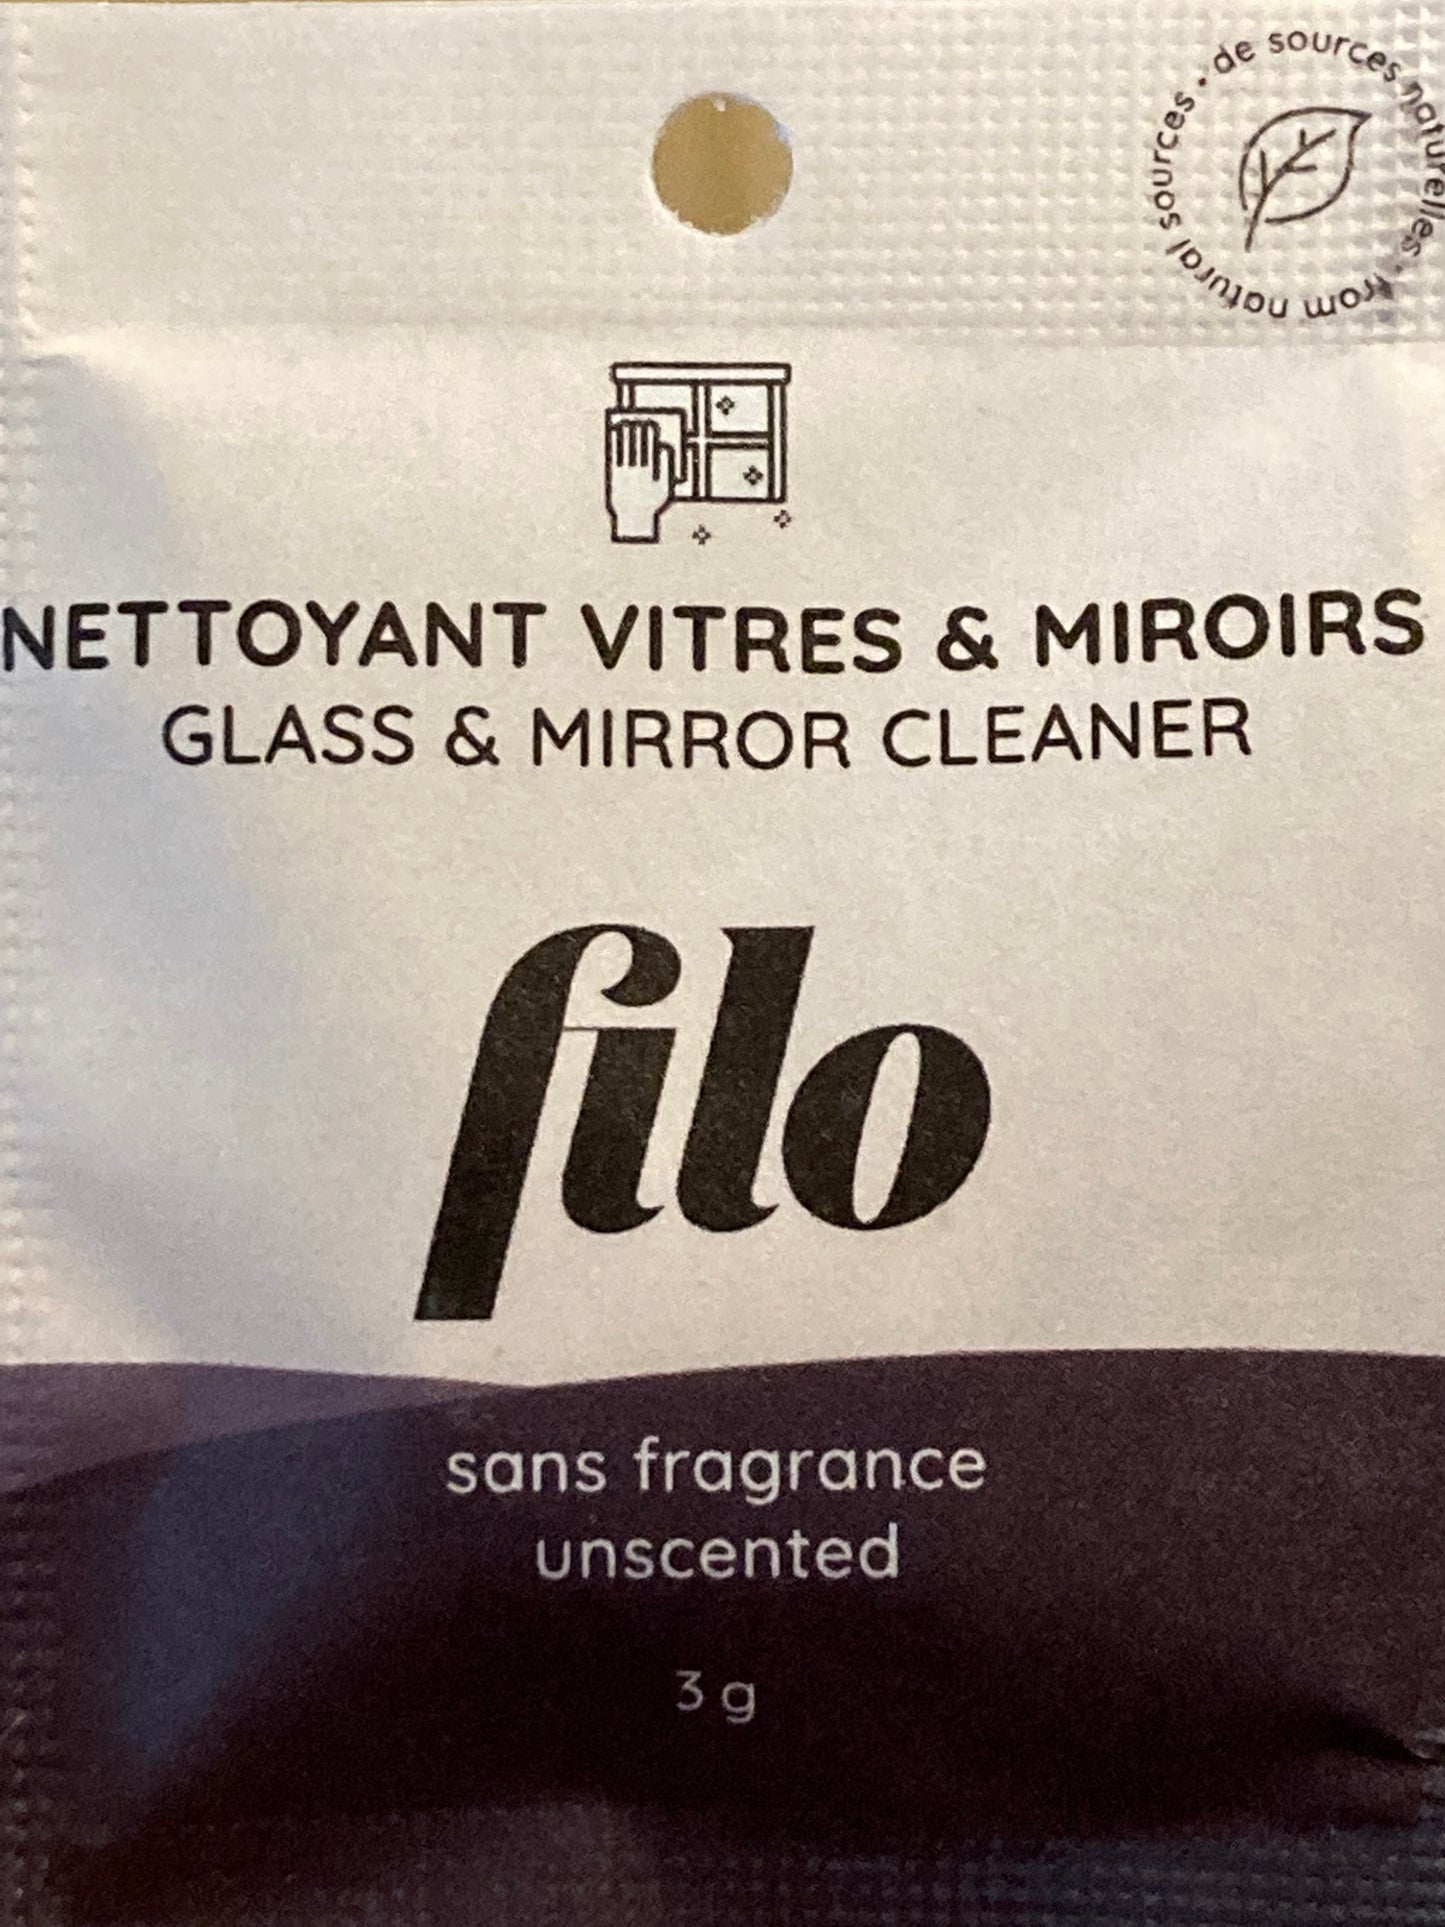 EcoHome - Filo GLASS, WINDOW & MIRROR CLEANER, “in a CAPSULE”